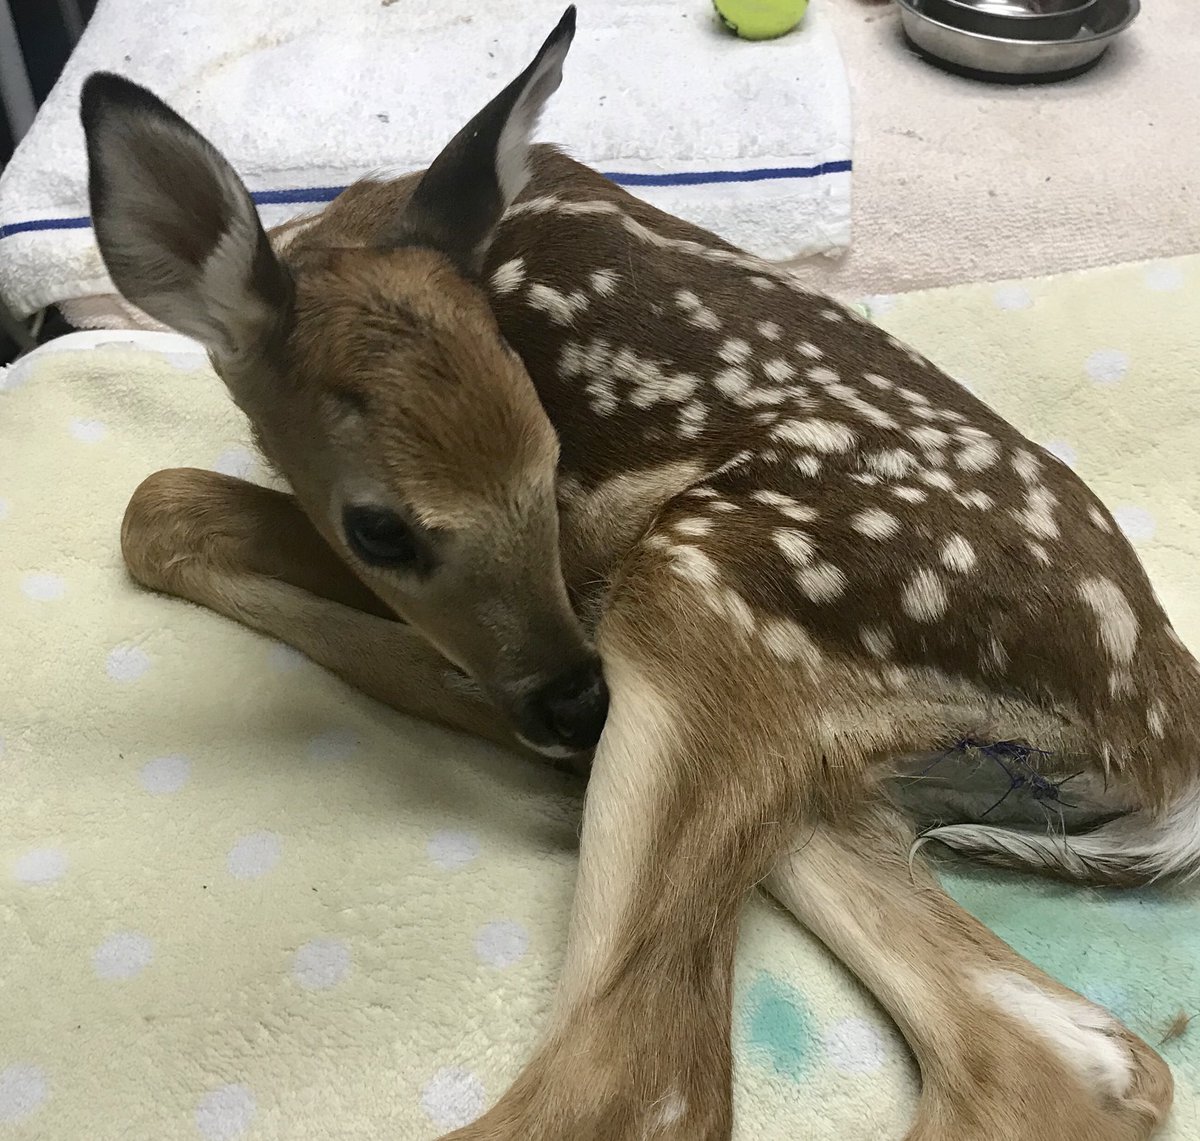 Fawn season is here! Please@mind your dogs. This little one was brought home by a dog and sustained some lacerations. He arrived here after a unsuccessful attempt to reunite the Fawn with its mother. #deer #wildliferehab #wildlifeorphans